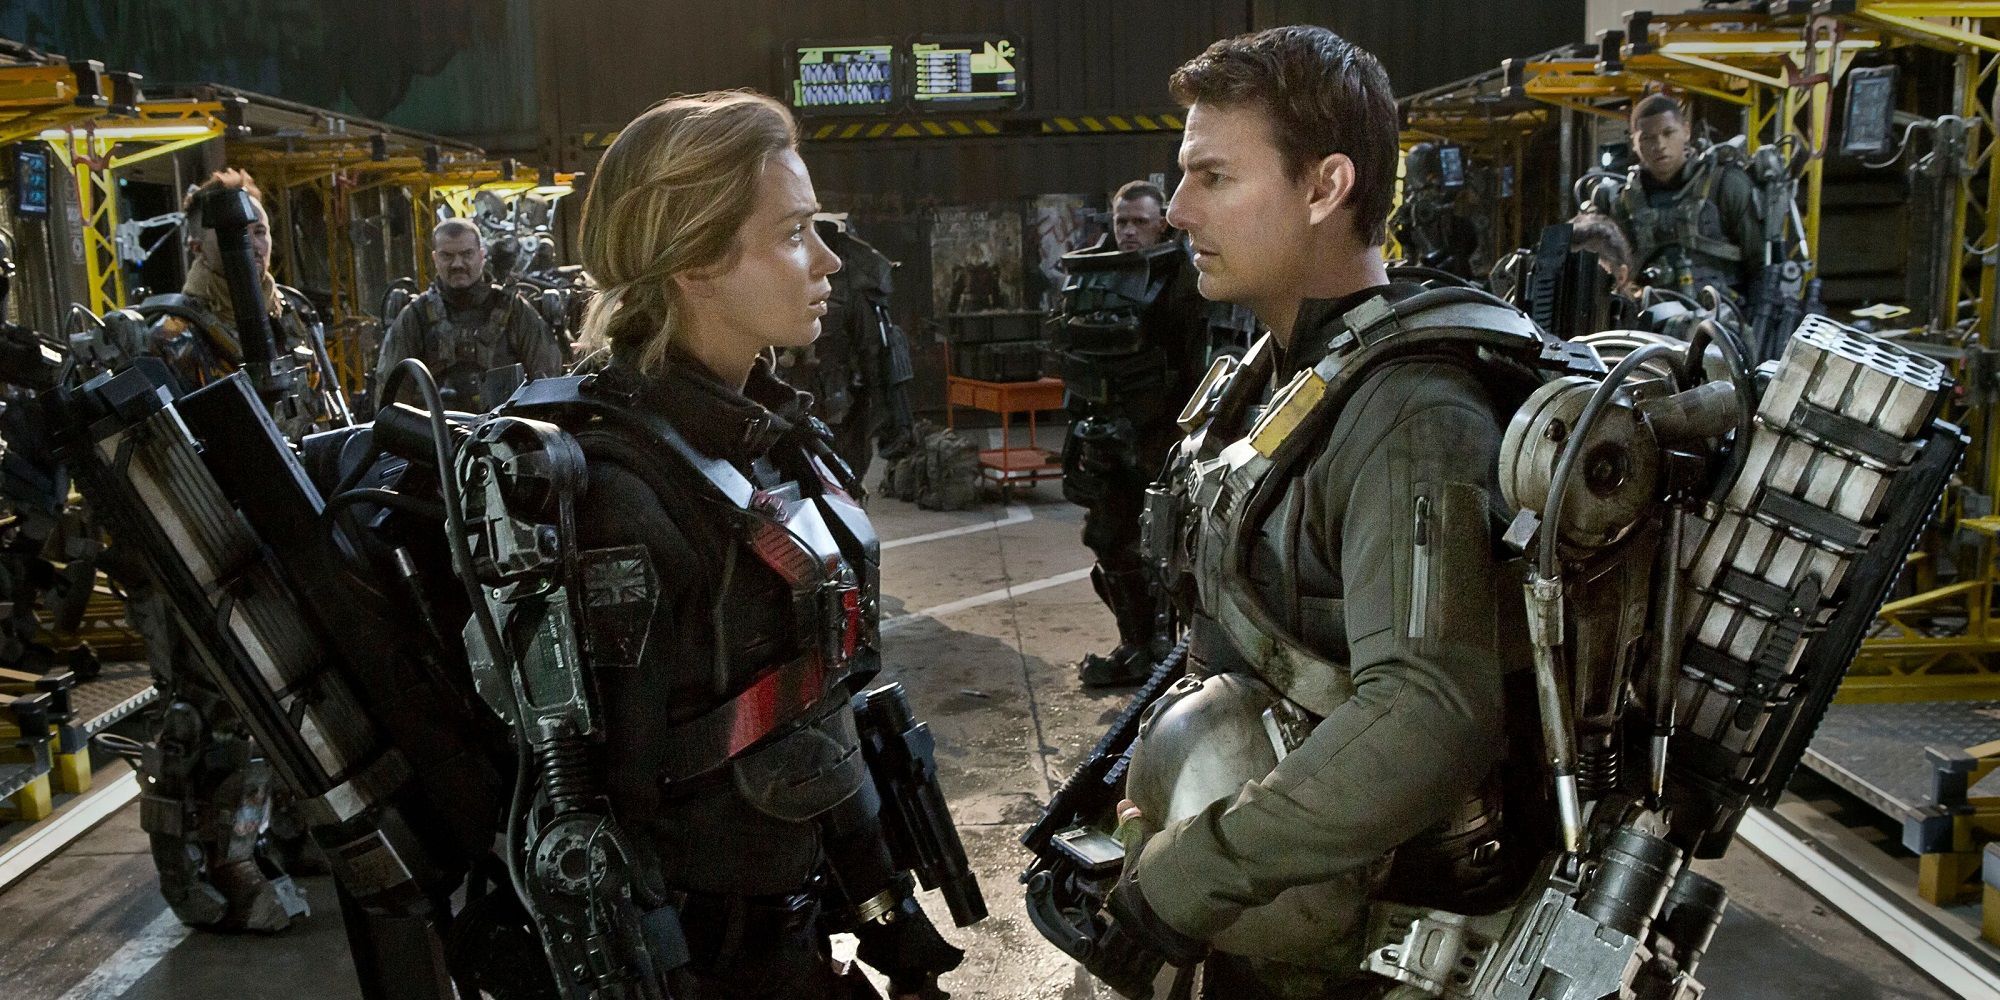 Rita and Ron face each other in Edge of Tomorrow